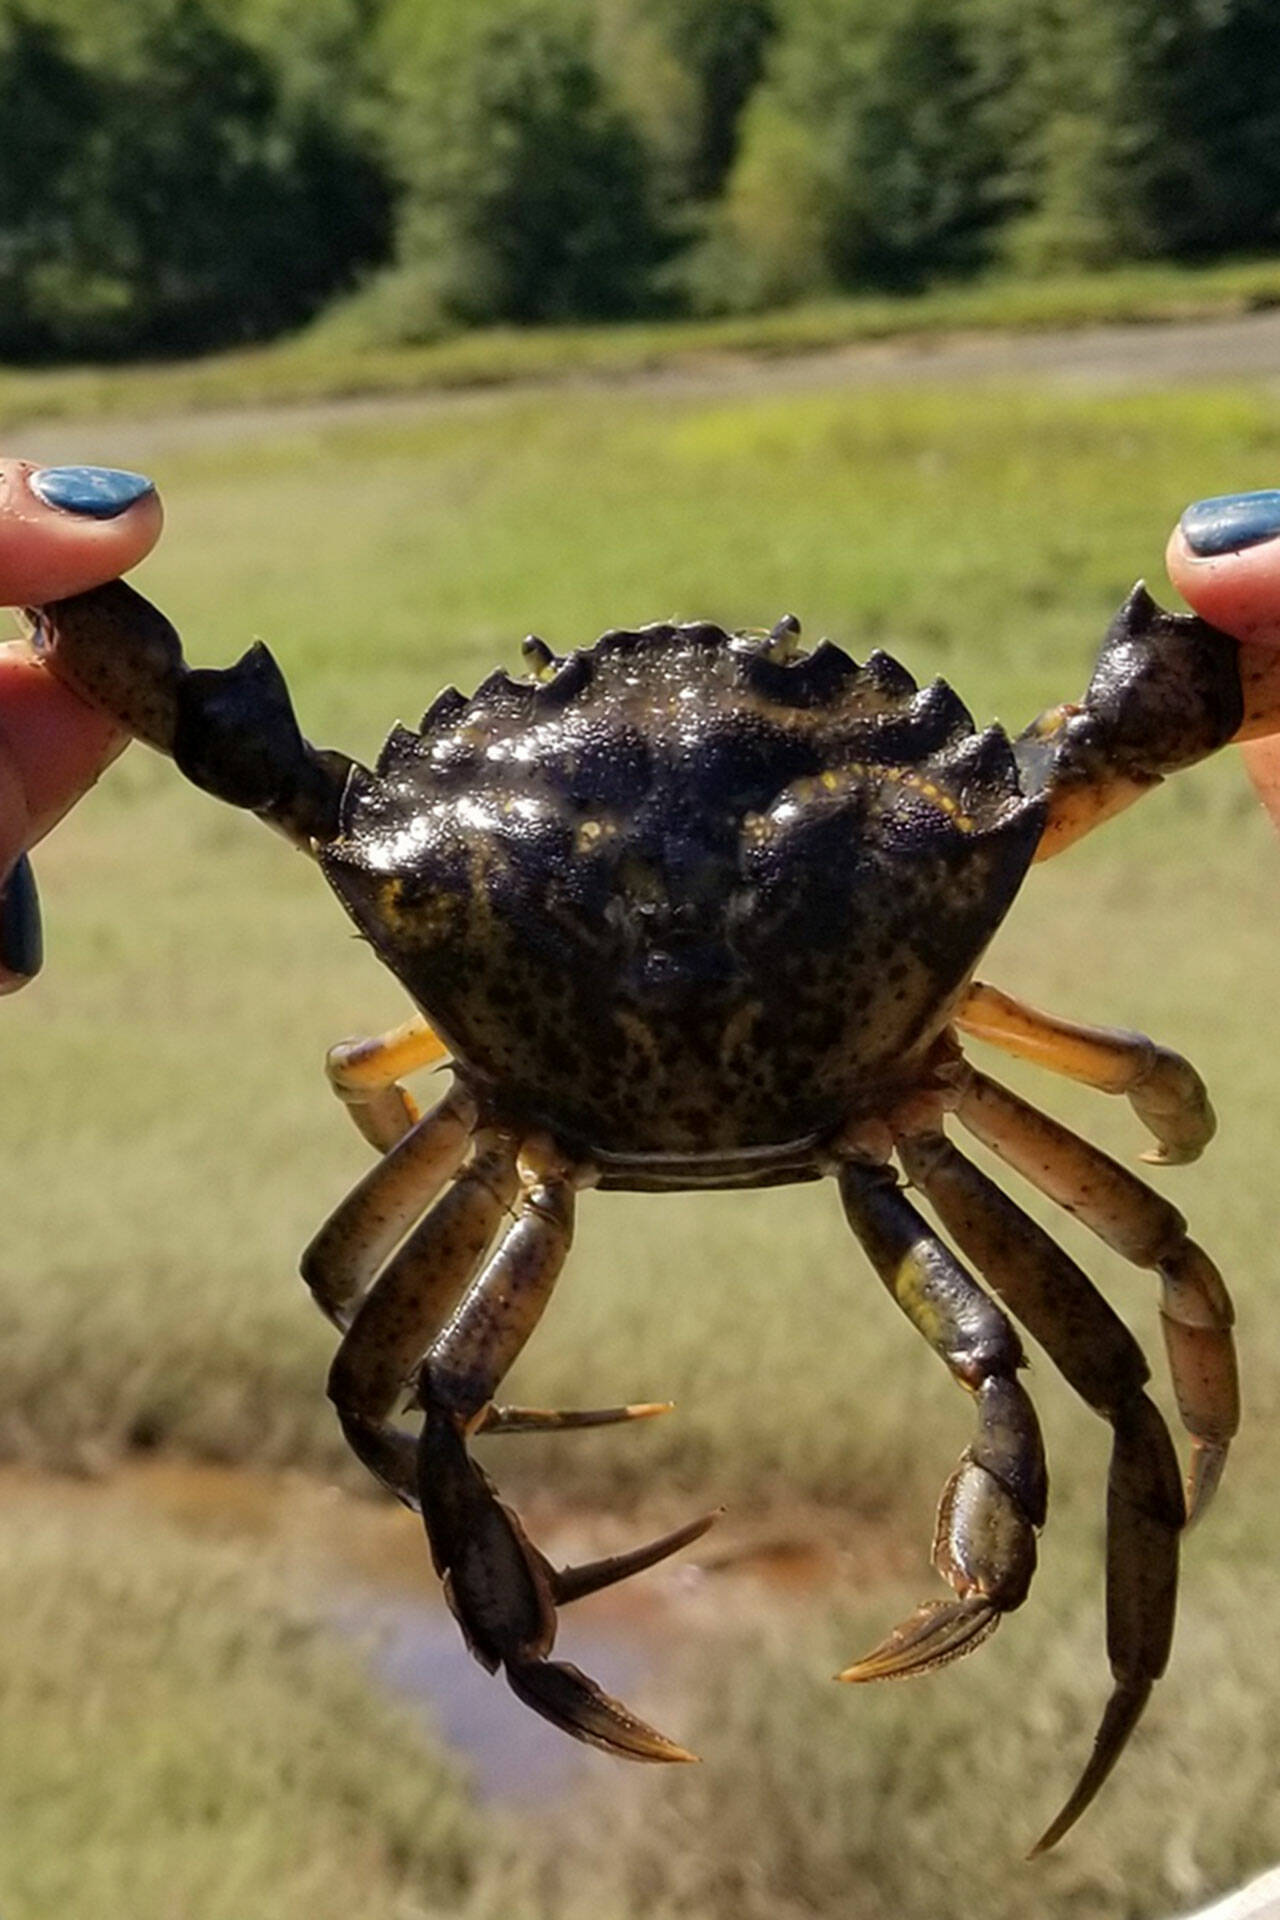 Photo courtesy Neil Harrington
A new emergency order by Gov. Jay Inslee could lead to more funding for trapping European green crab in Western Washington. In Blyn, 16 green crab were trapped in Sequim Bay after years with a few to none found.